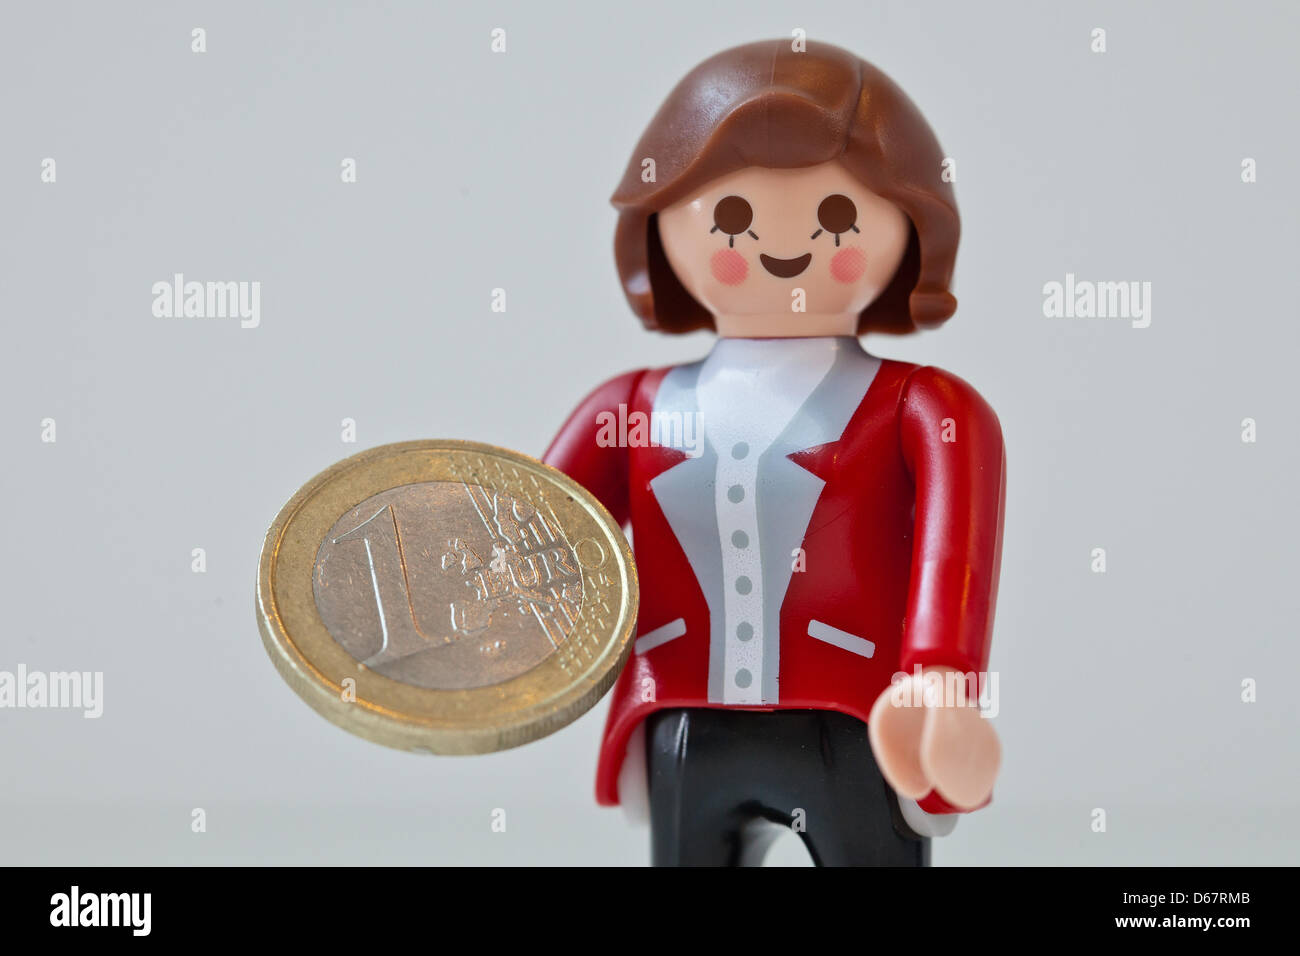 An illustration shows German chancellor Angela Merkel as Playmobil figure  holding a euro coin at the toy manufacturer Playmobil in Zirndorf, Germany,  28 June 2012. The figure was a present for the